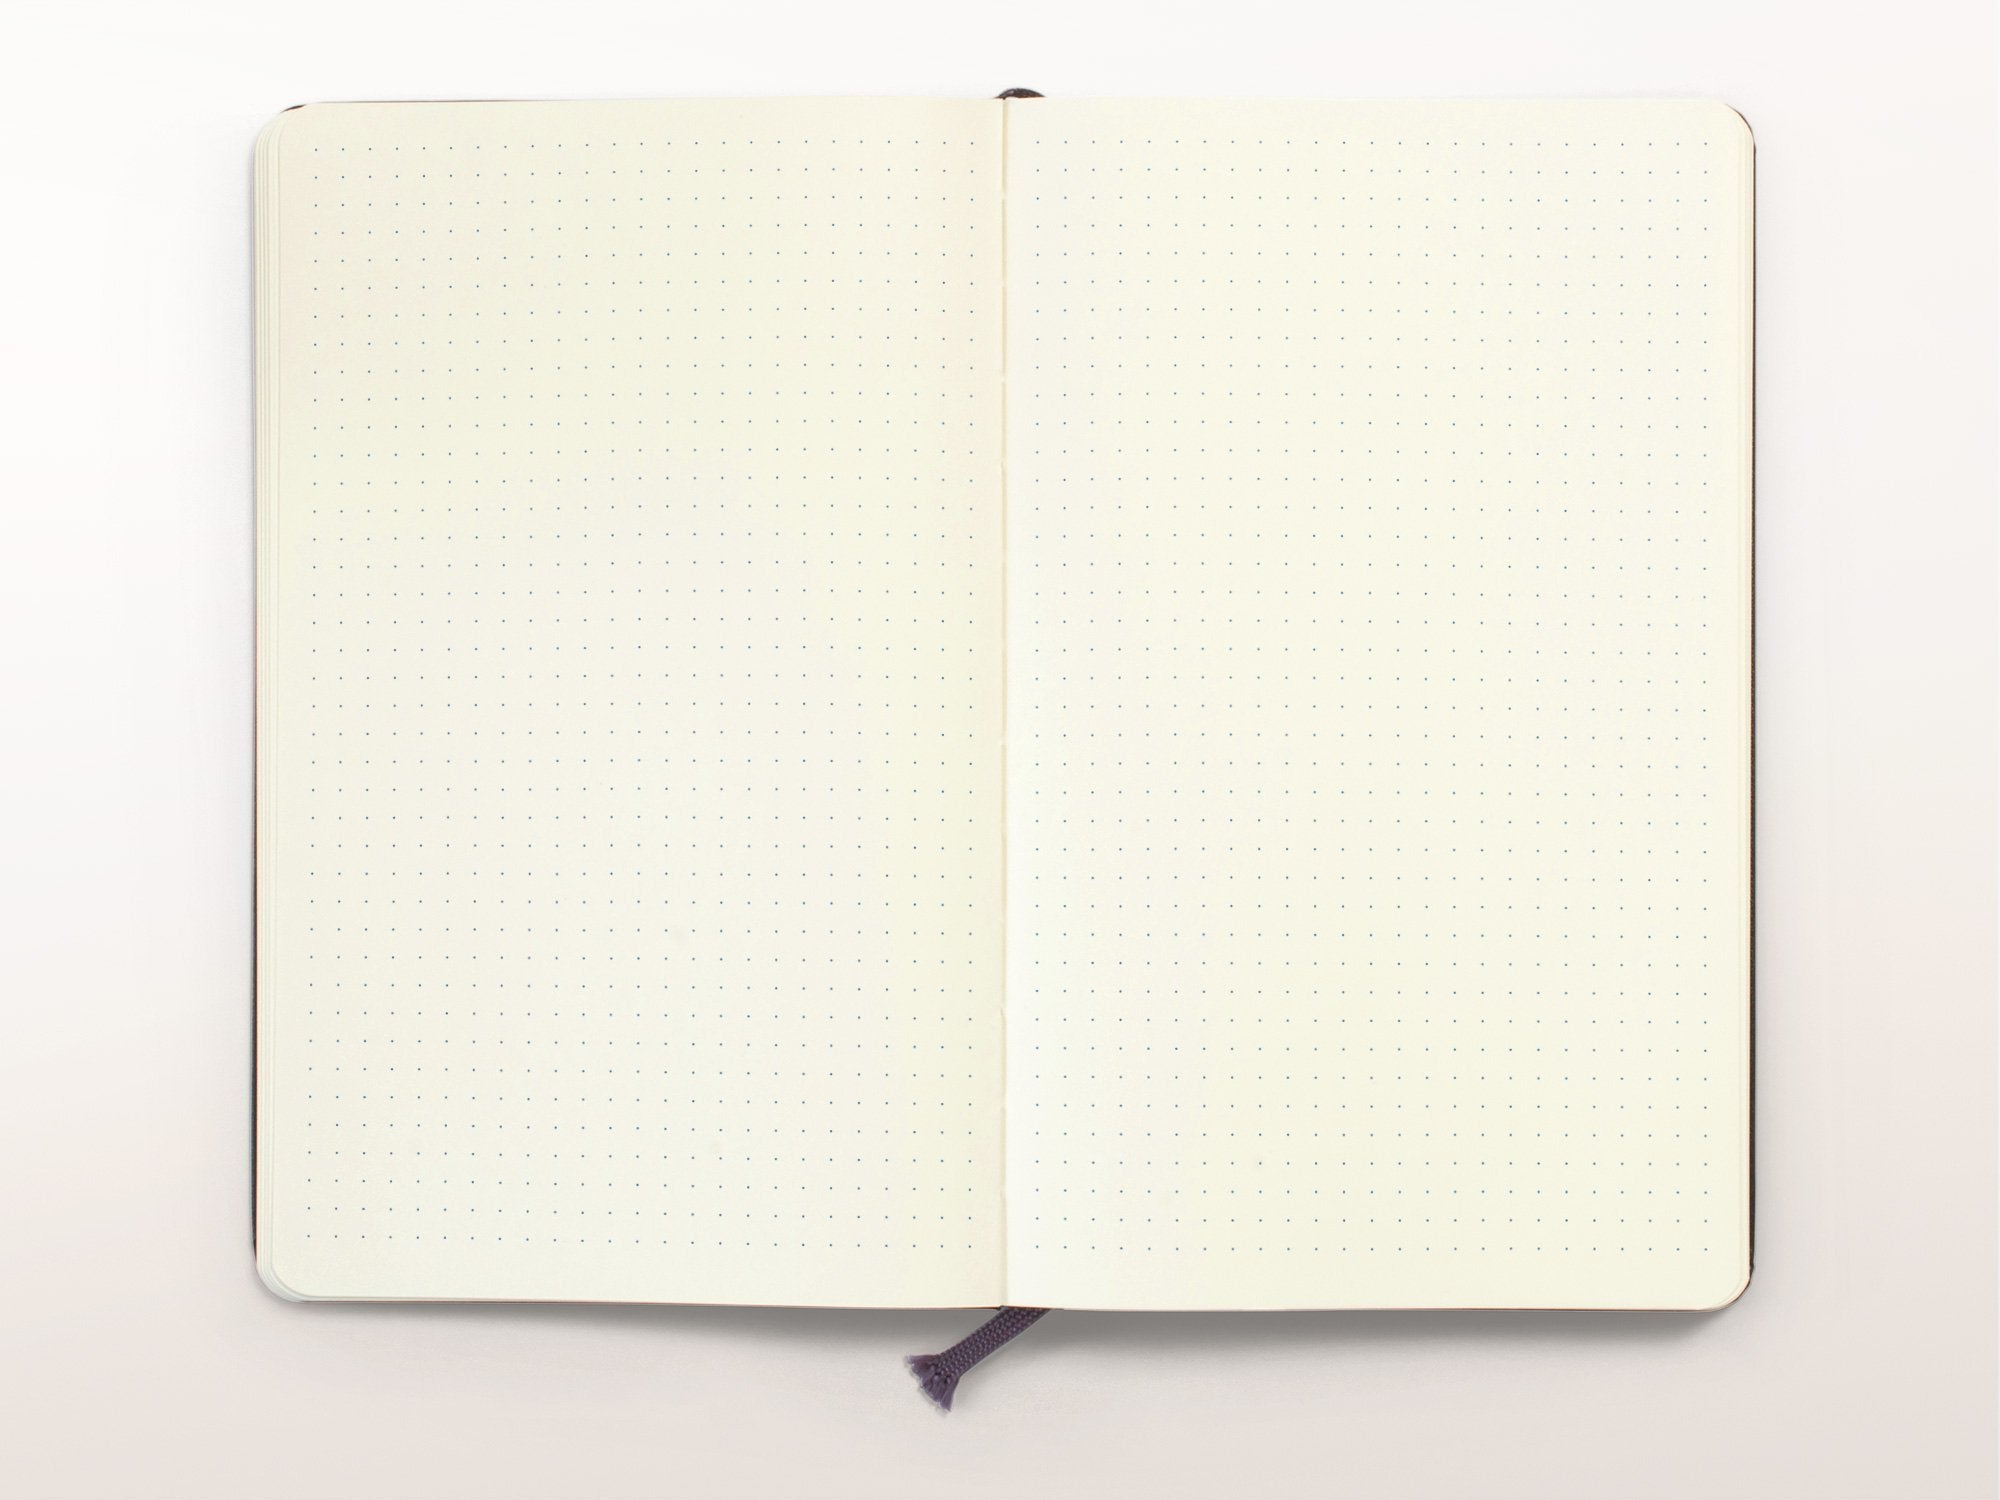 Moleskine Classic Dotted Pocket Notebook, Hard Cover, Black